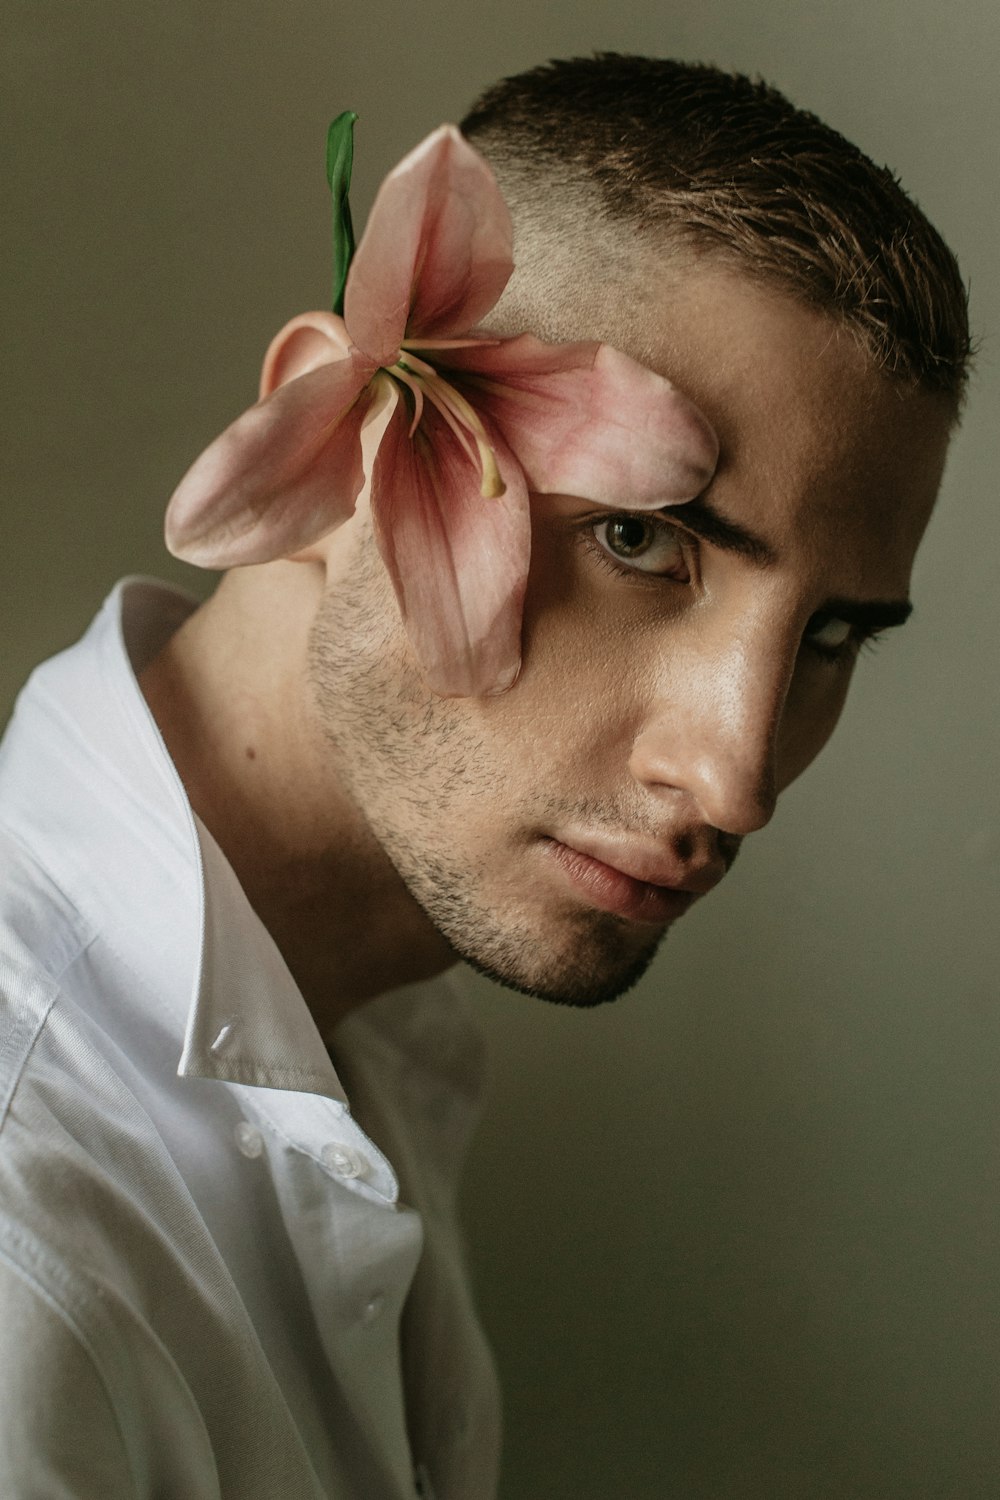 a man with a flower in his hair